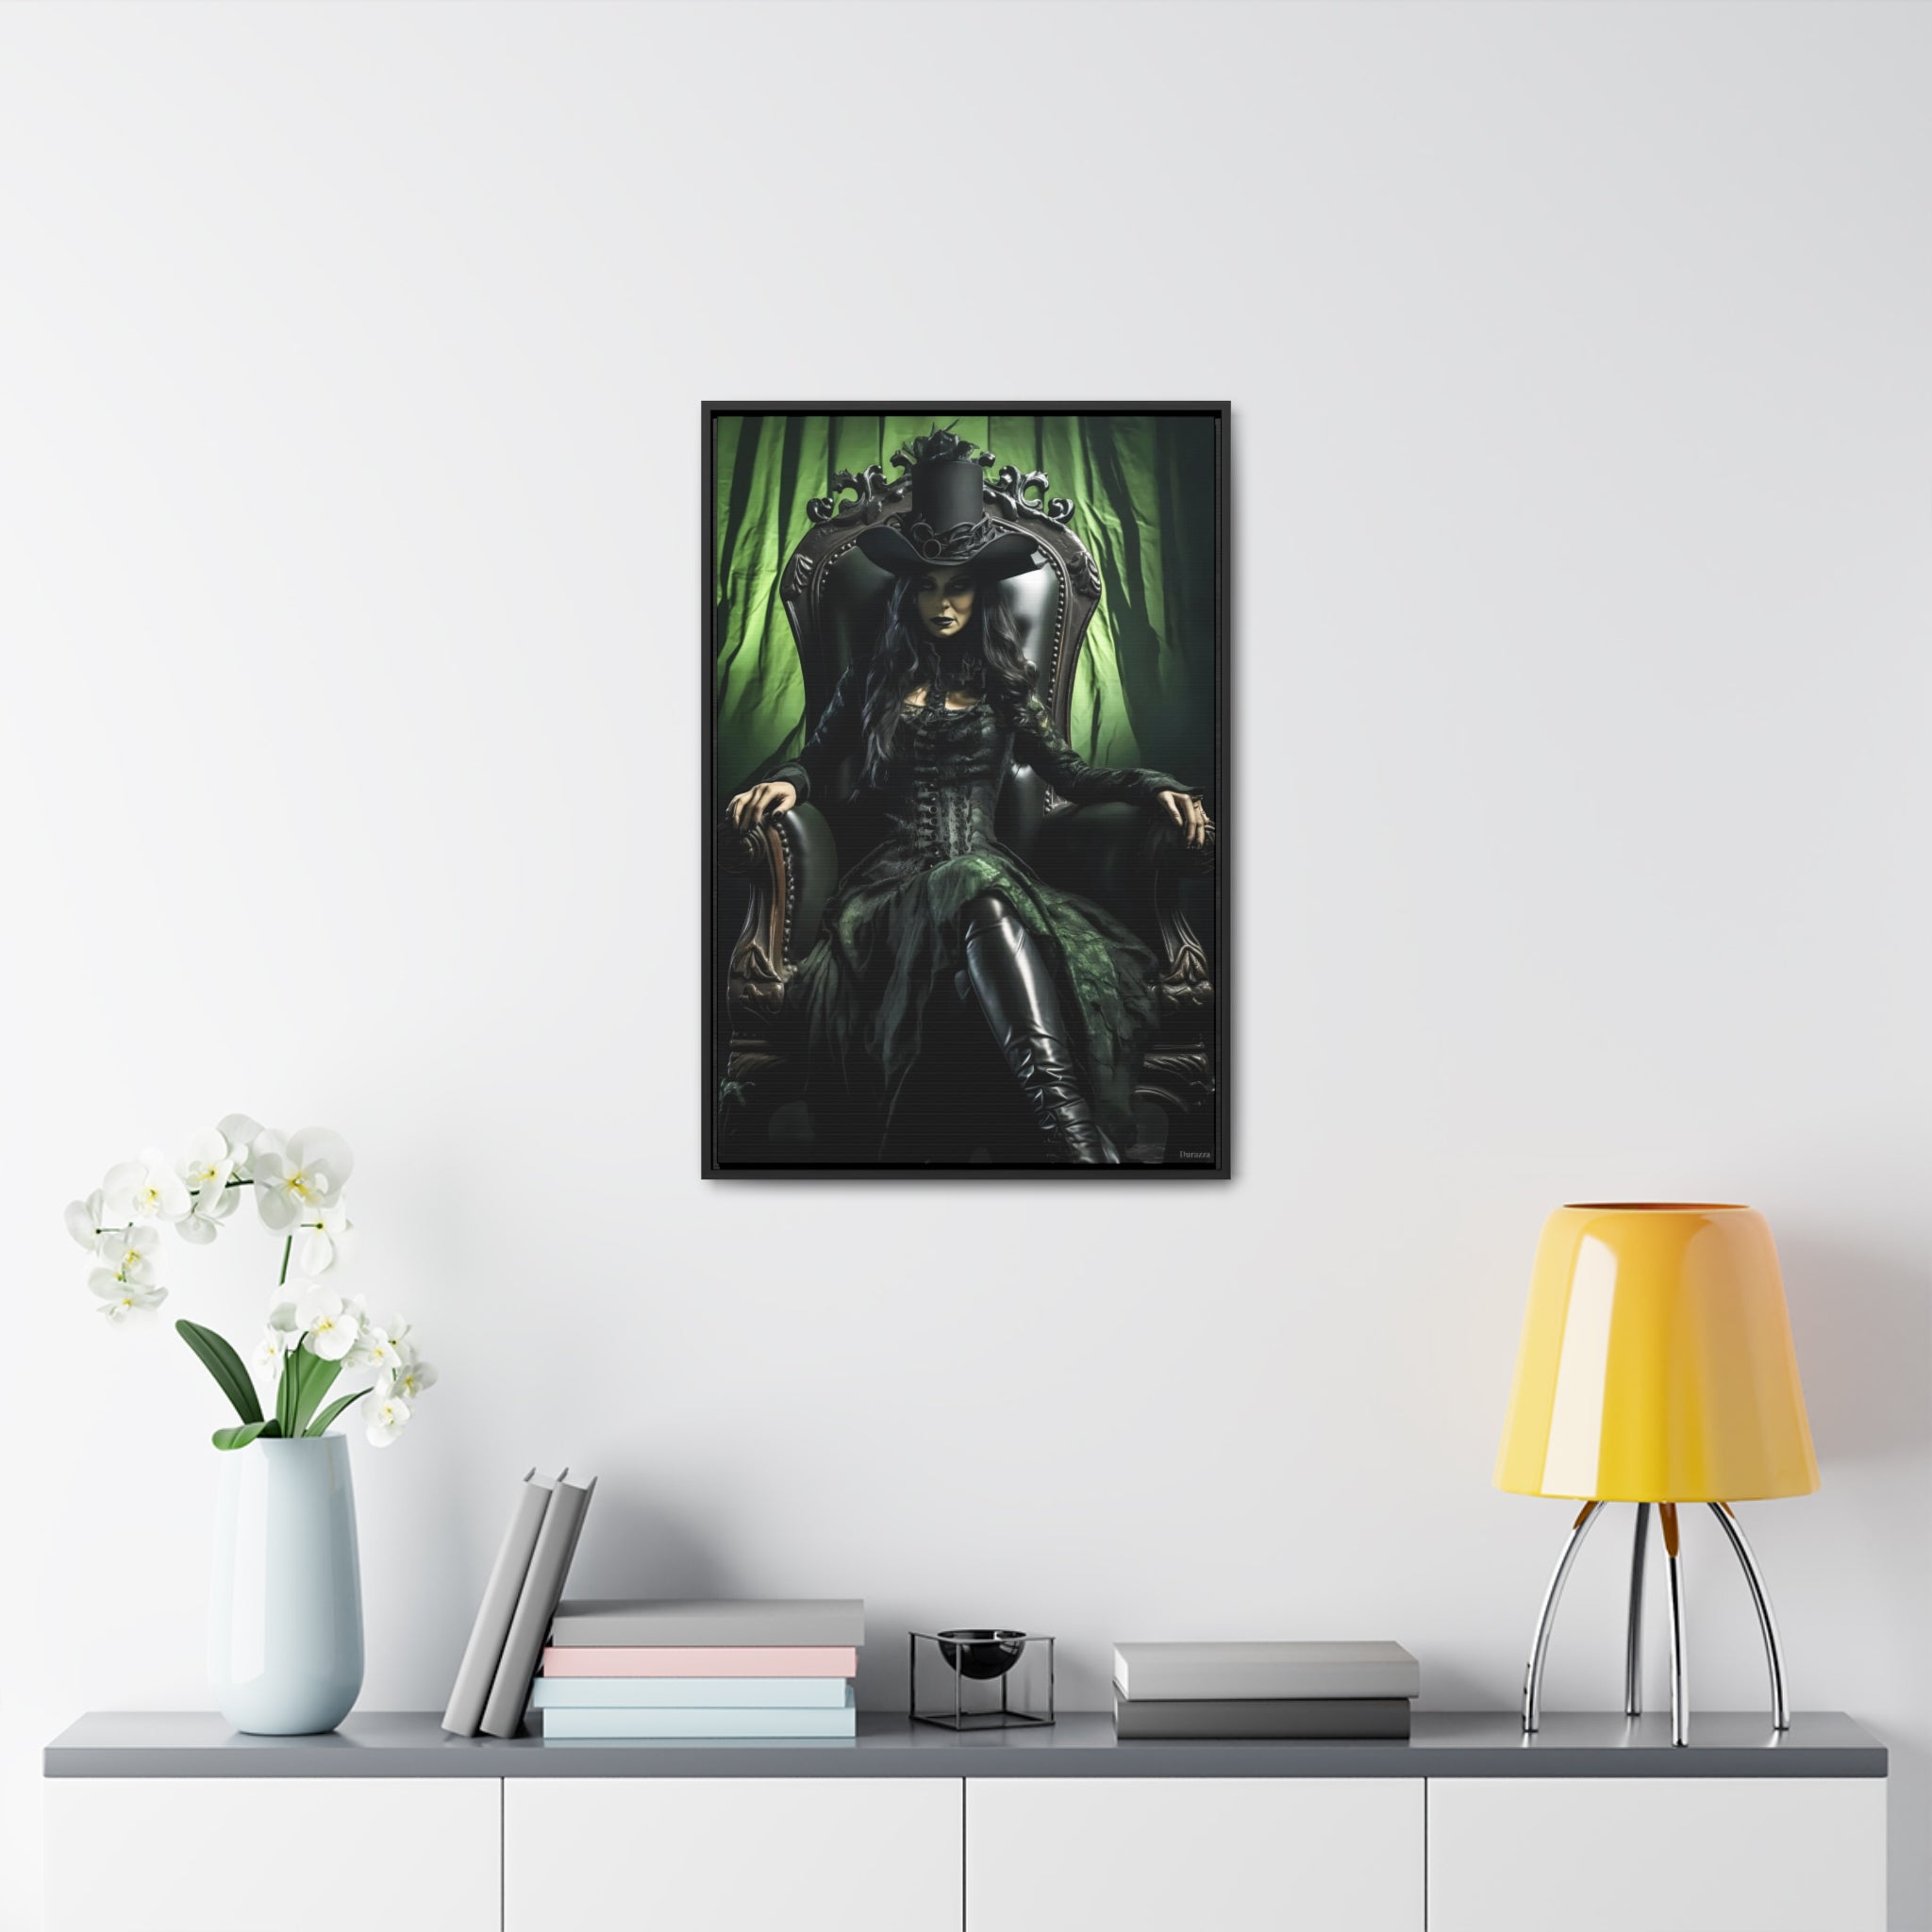 The Witches Gothic Parlor Framed Art Print